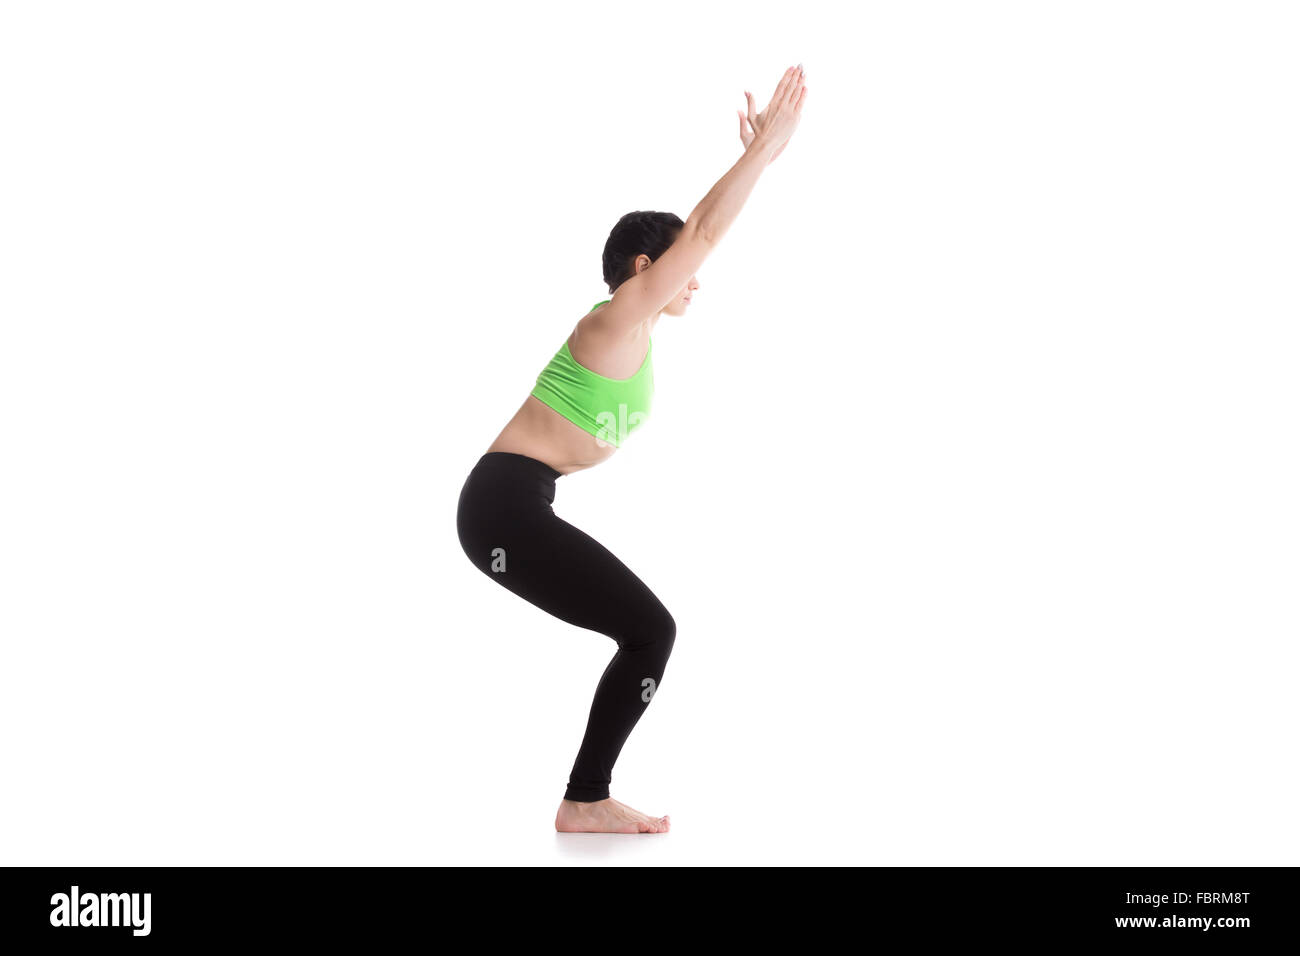 Hips Don't Lie: 5 Yoga Poses You Can't Deny - Beyogi